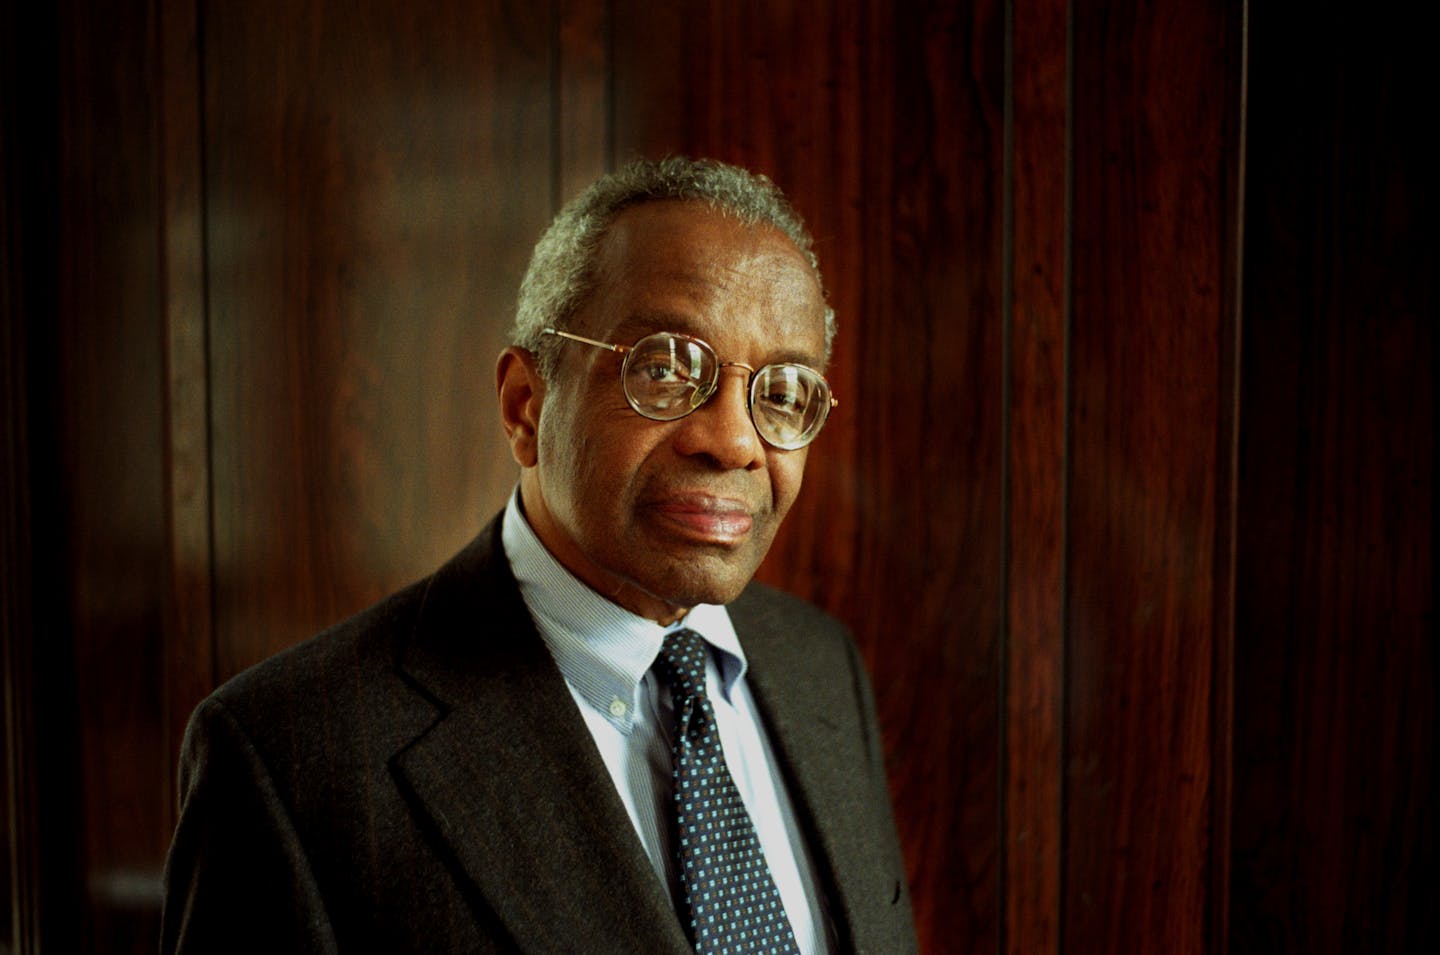 Harvard Law profesor Derrick Bell is credited with originating critical race theory